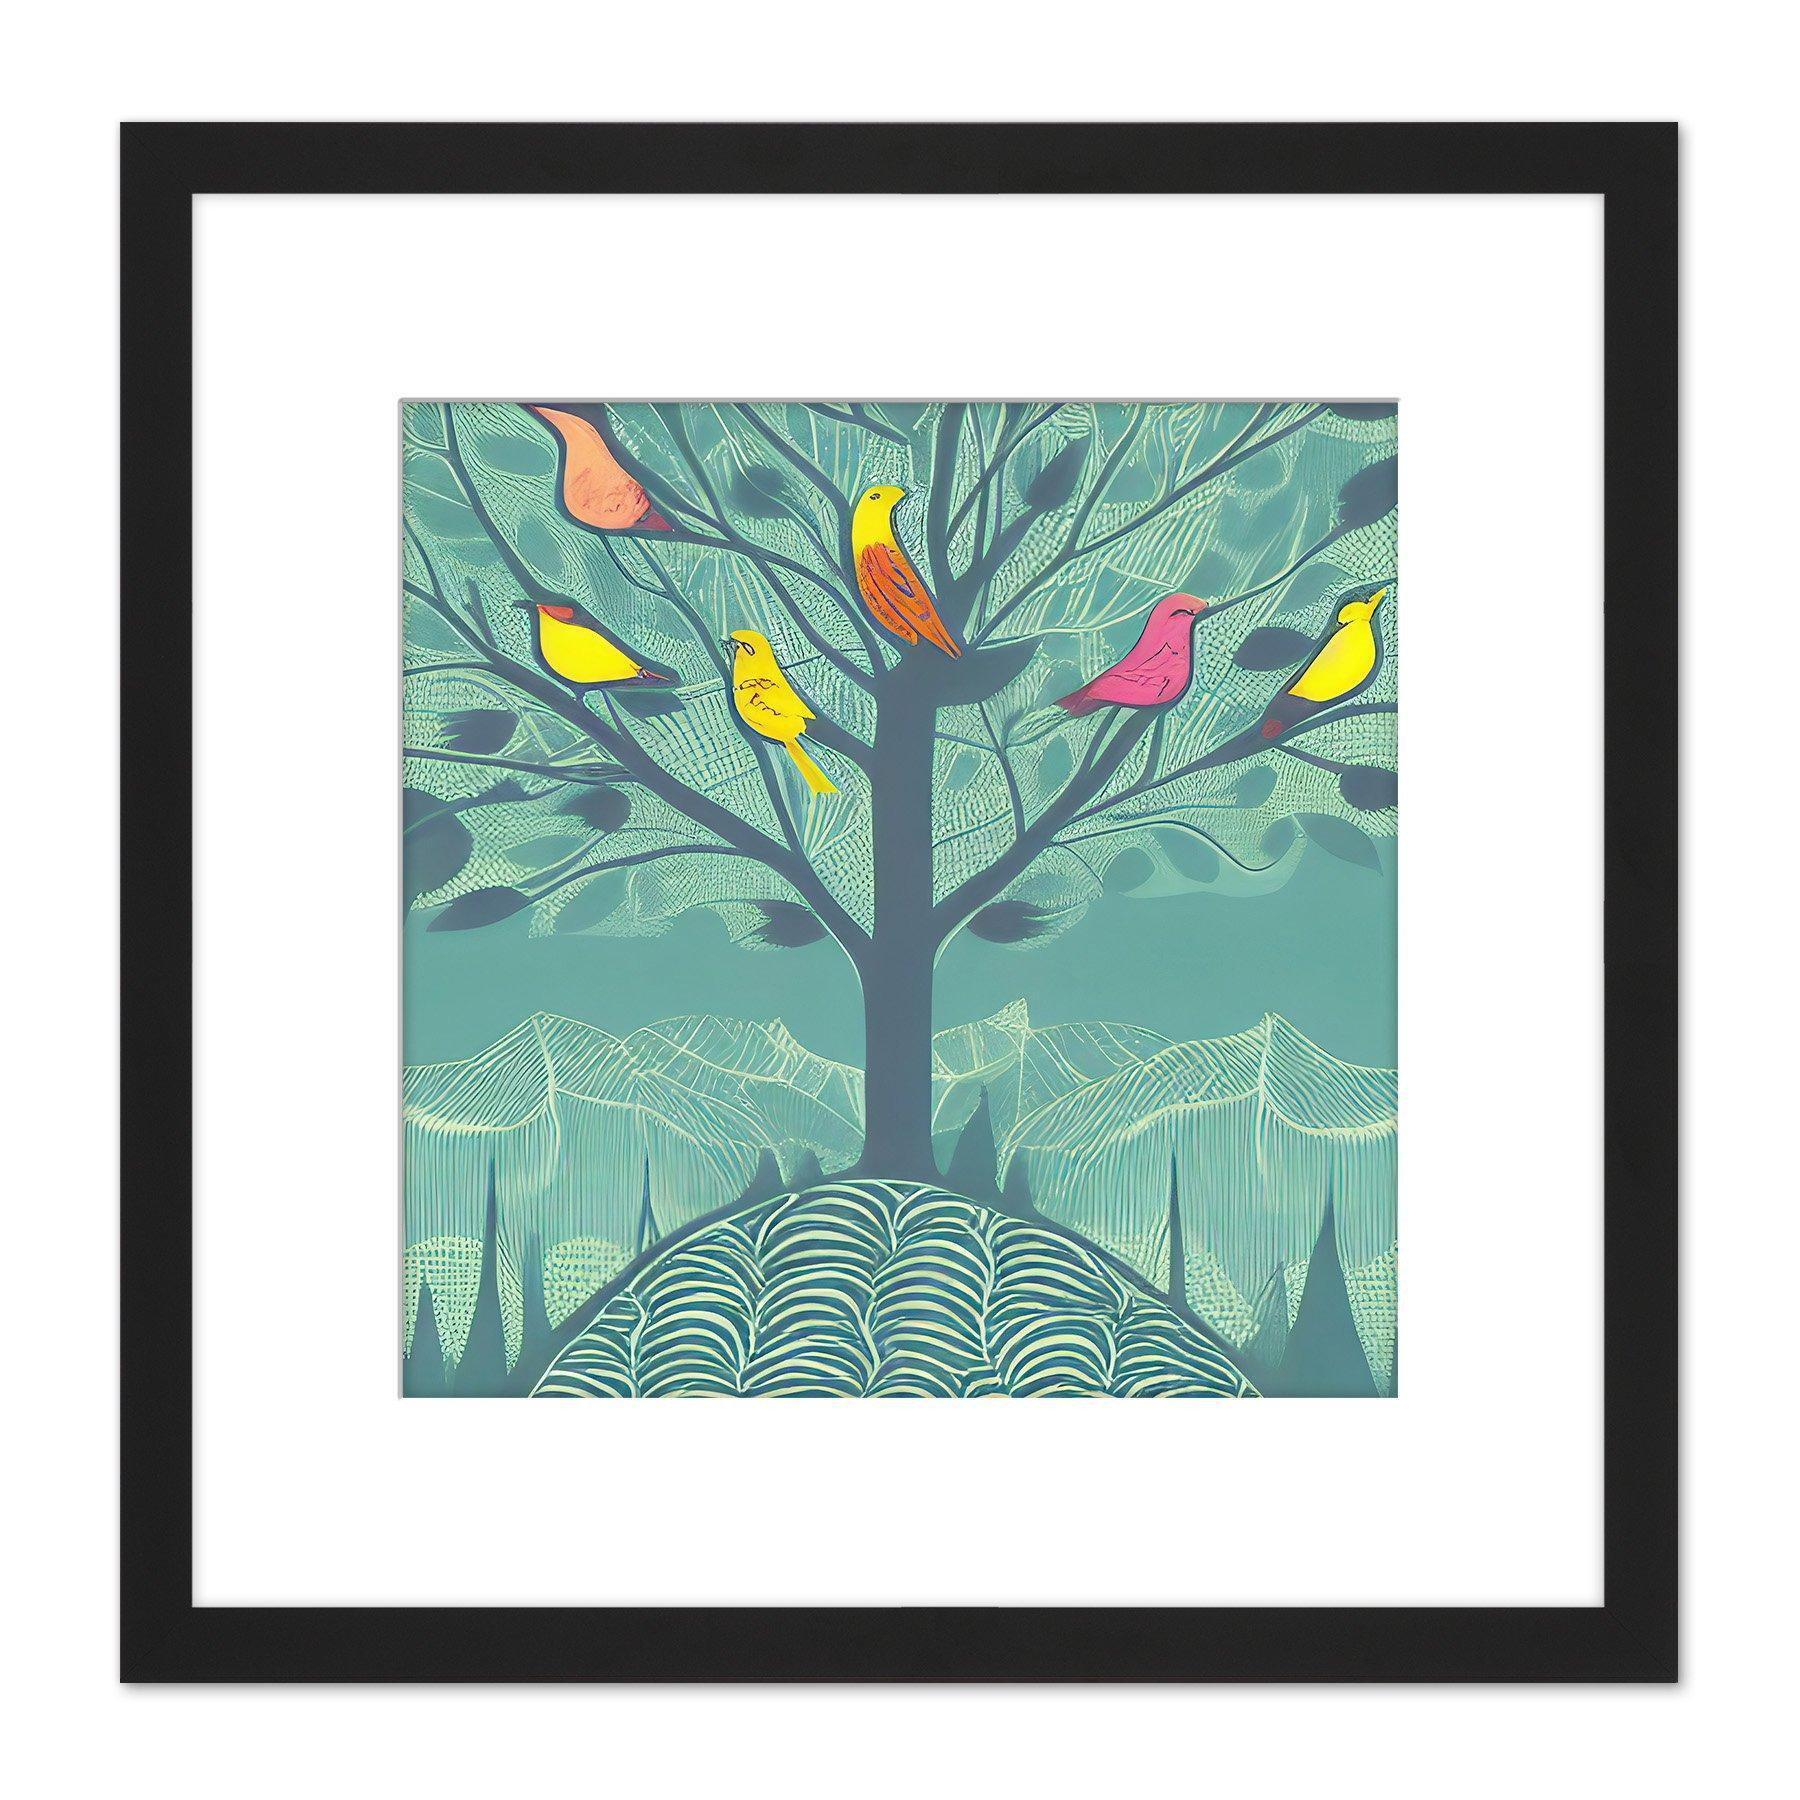 Colourful Birds Perching on Lone Tree Branches in Teal Blue Mountain Landscape Square Wooden Framed Wall Art Print Picture 8X8 Inch - image 1